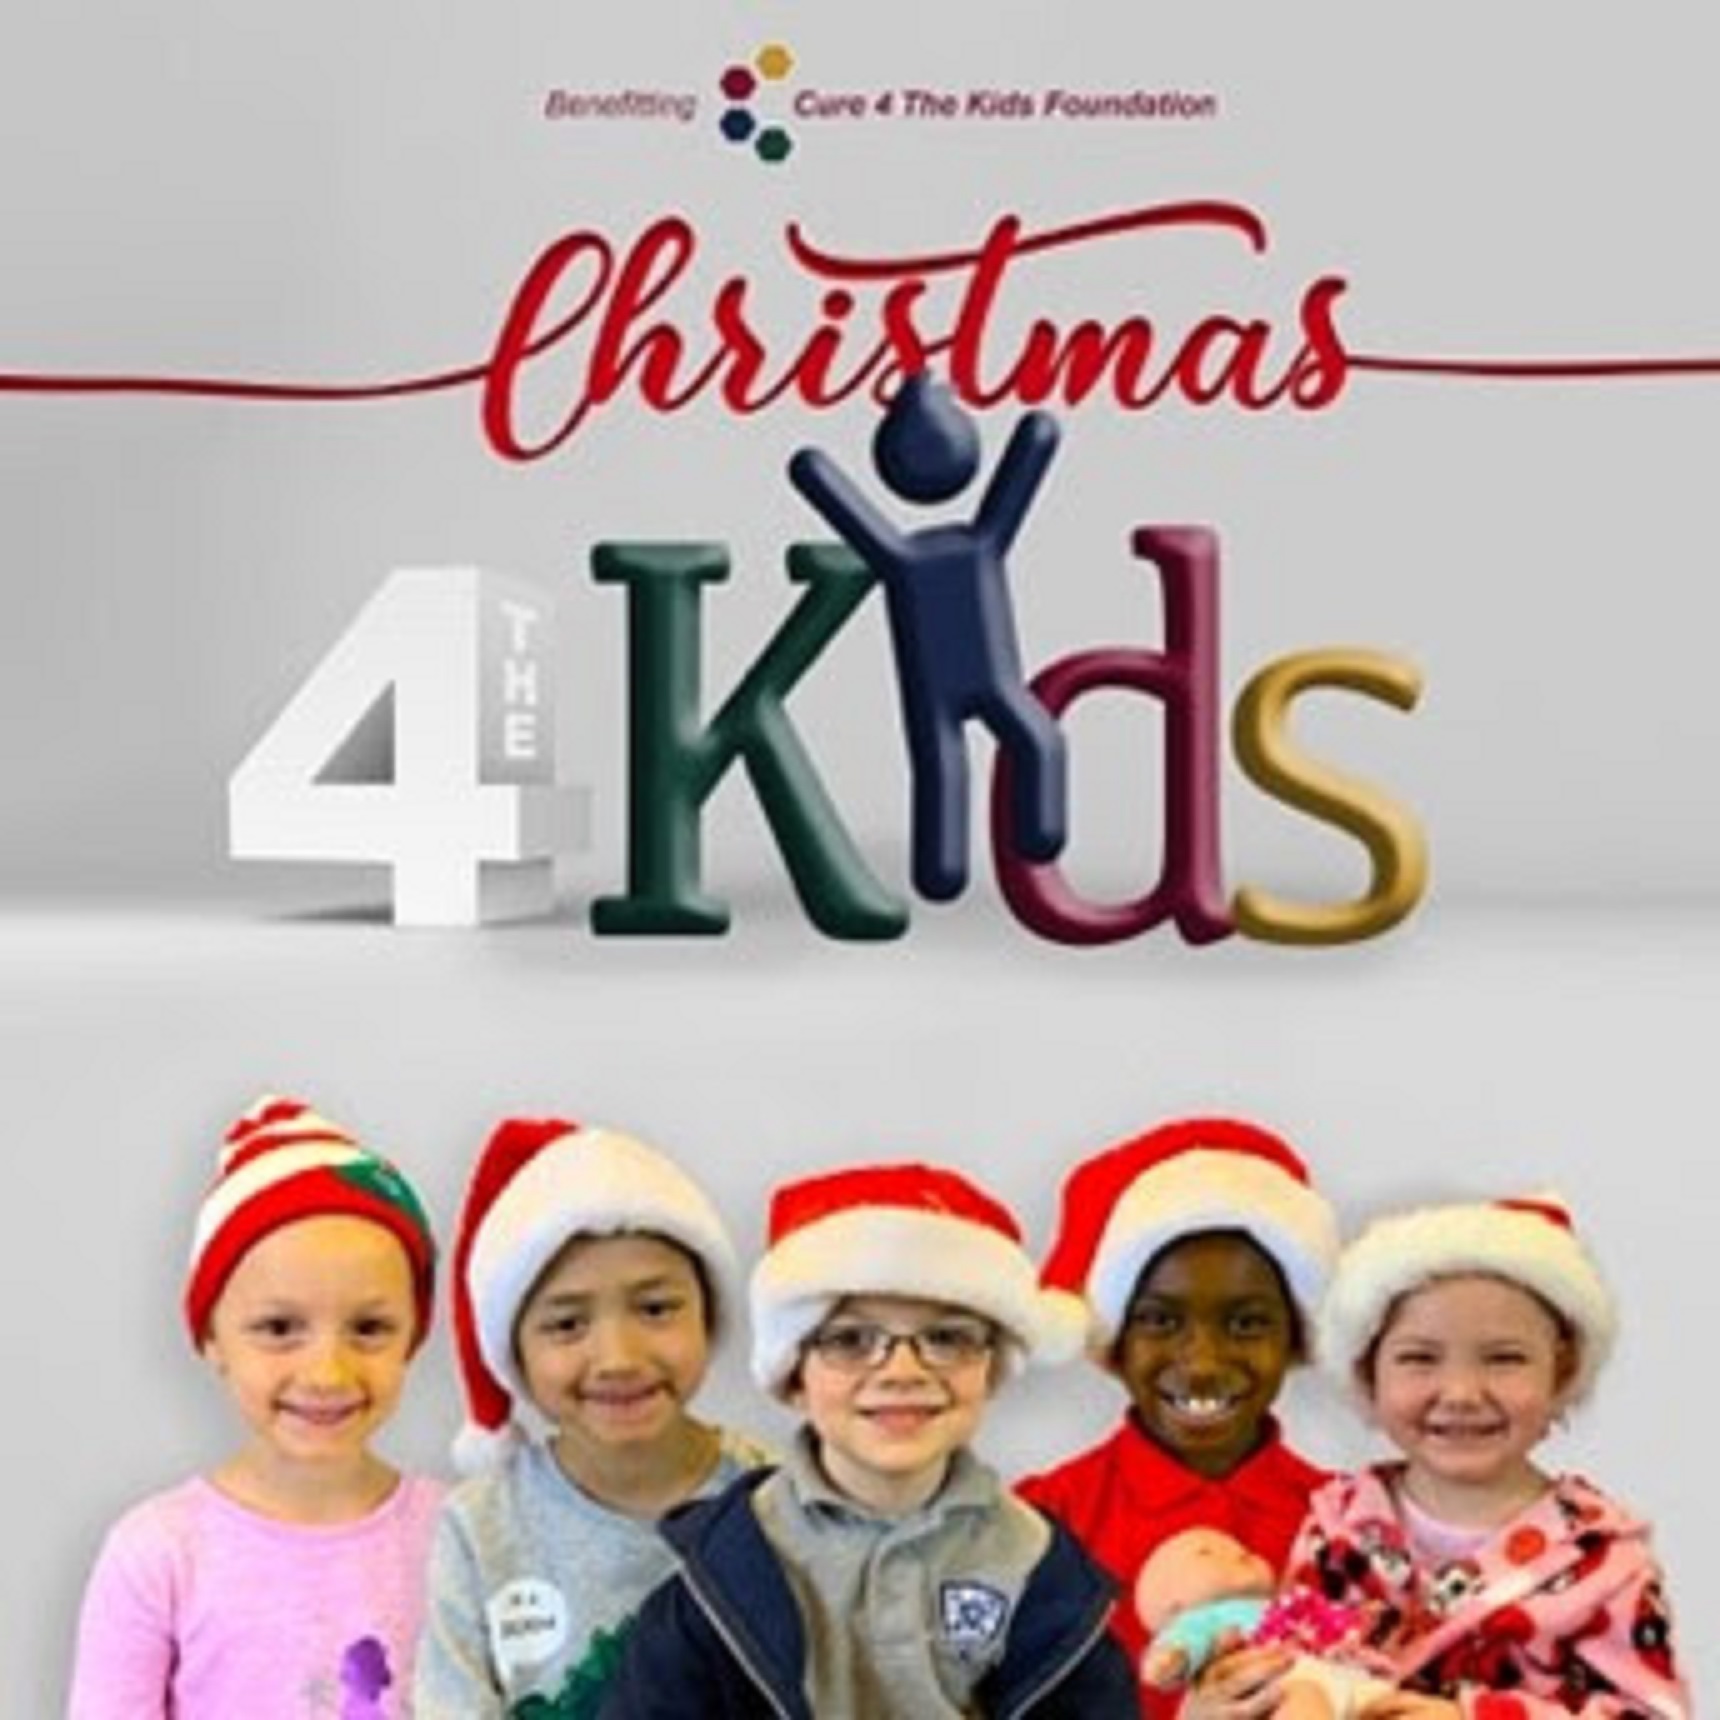 Christmas 4 The Kids Digital Album Benefits Pediatric Cancer Patients at Cure 4 The Kids Foundation